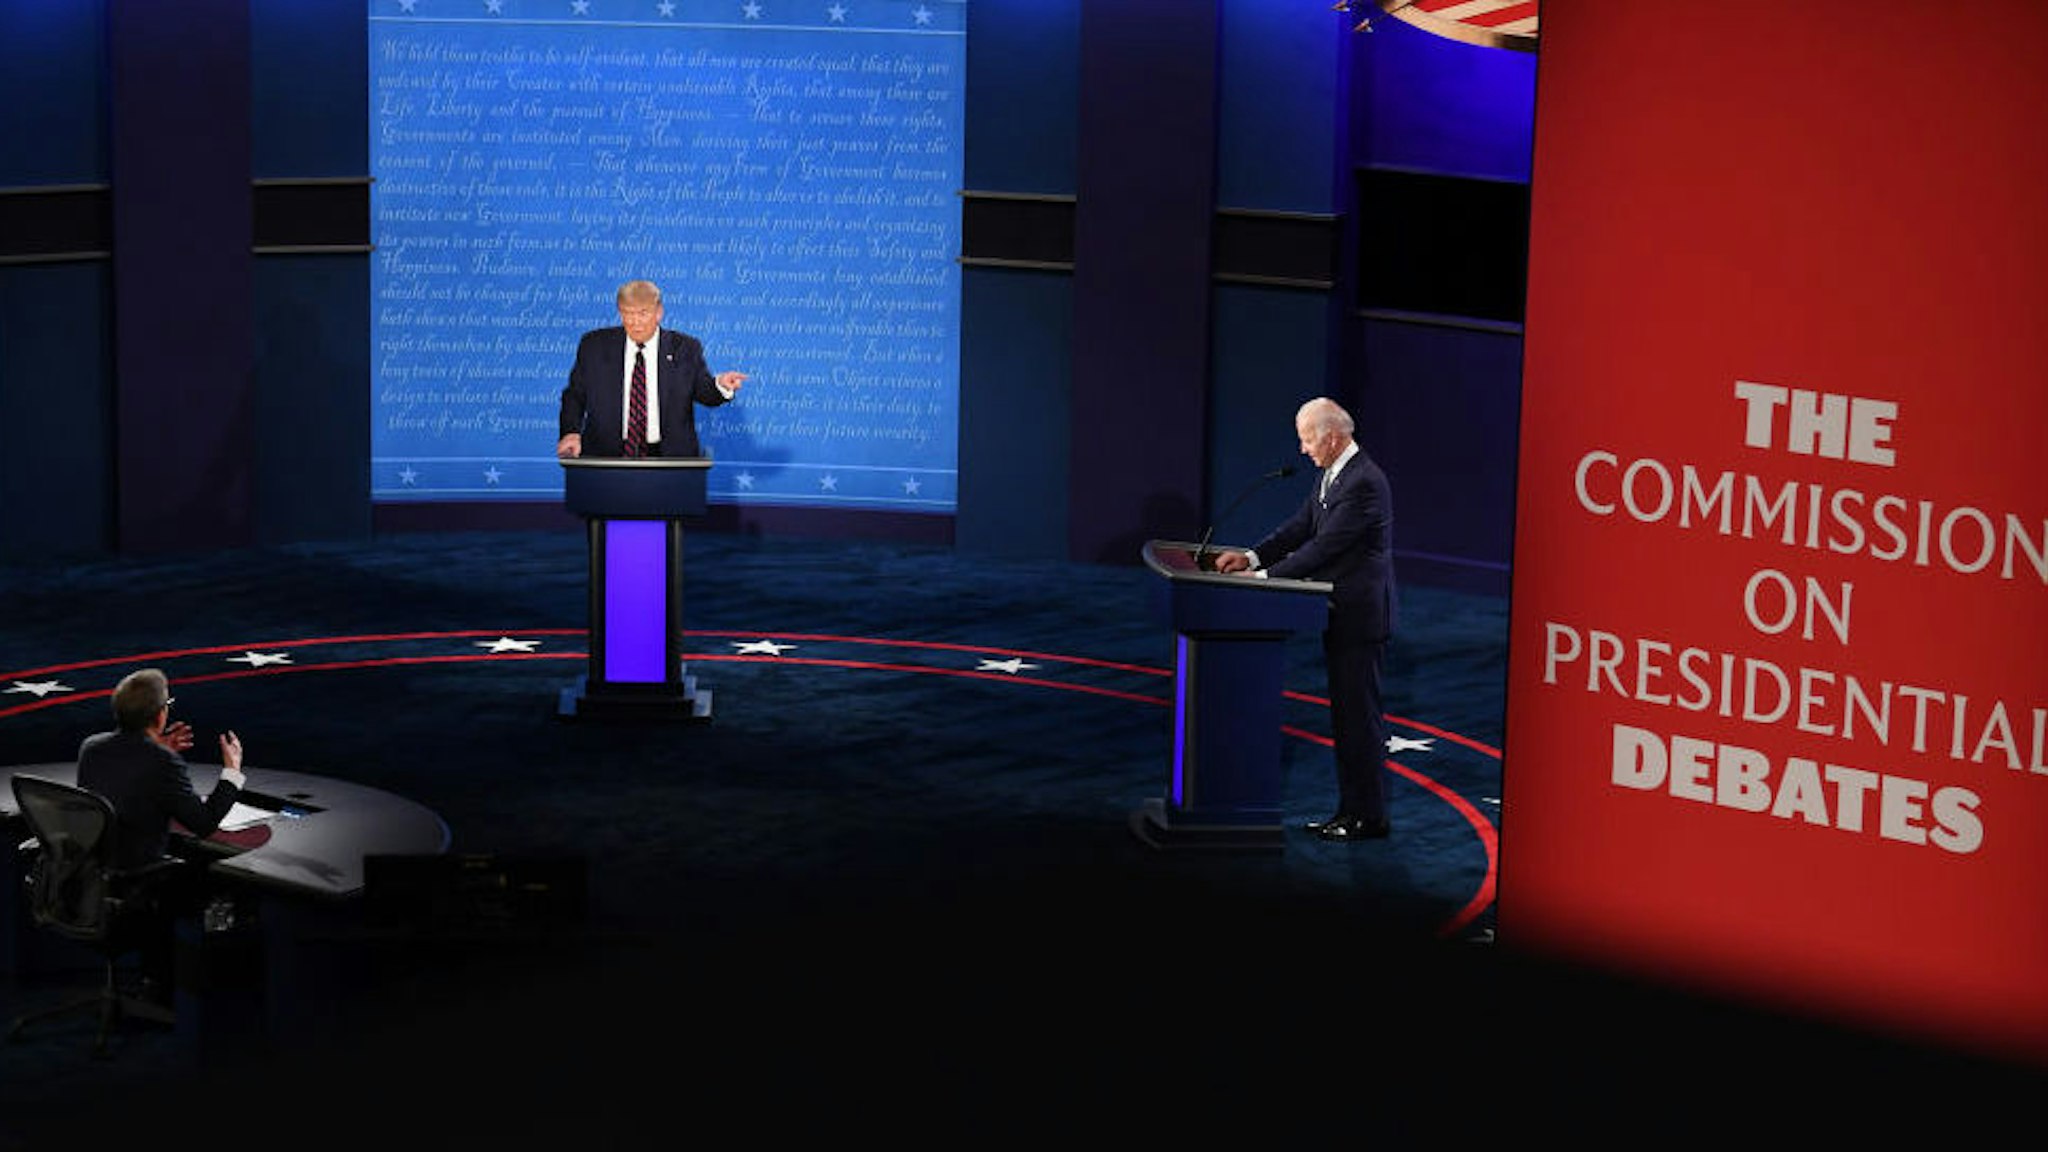 U.S. President Donald Trump, left, speaks as Joe Biden, 2020 Democratic presidential nominee, right, listens during the first U.S. presidential debate hosted by Case Western Reserve University and the Cleveland Clinic in Cleveland, Ohio, U.S., on Tuesday, Sept. 29, 2020. Trump and Biden kick off their first debate with contentious topics like the Supreme Court and the coronavirus pandemic suddenly joined by yet another potentially explosive question -- whether the president ducked paying his taxes.